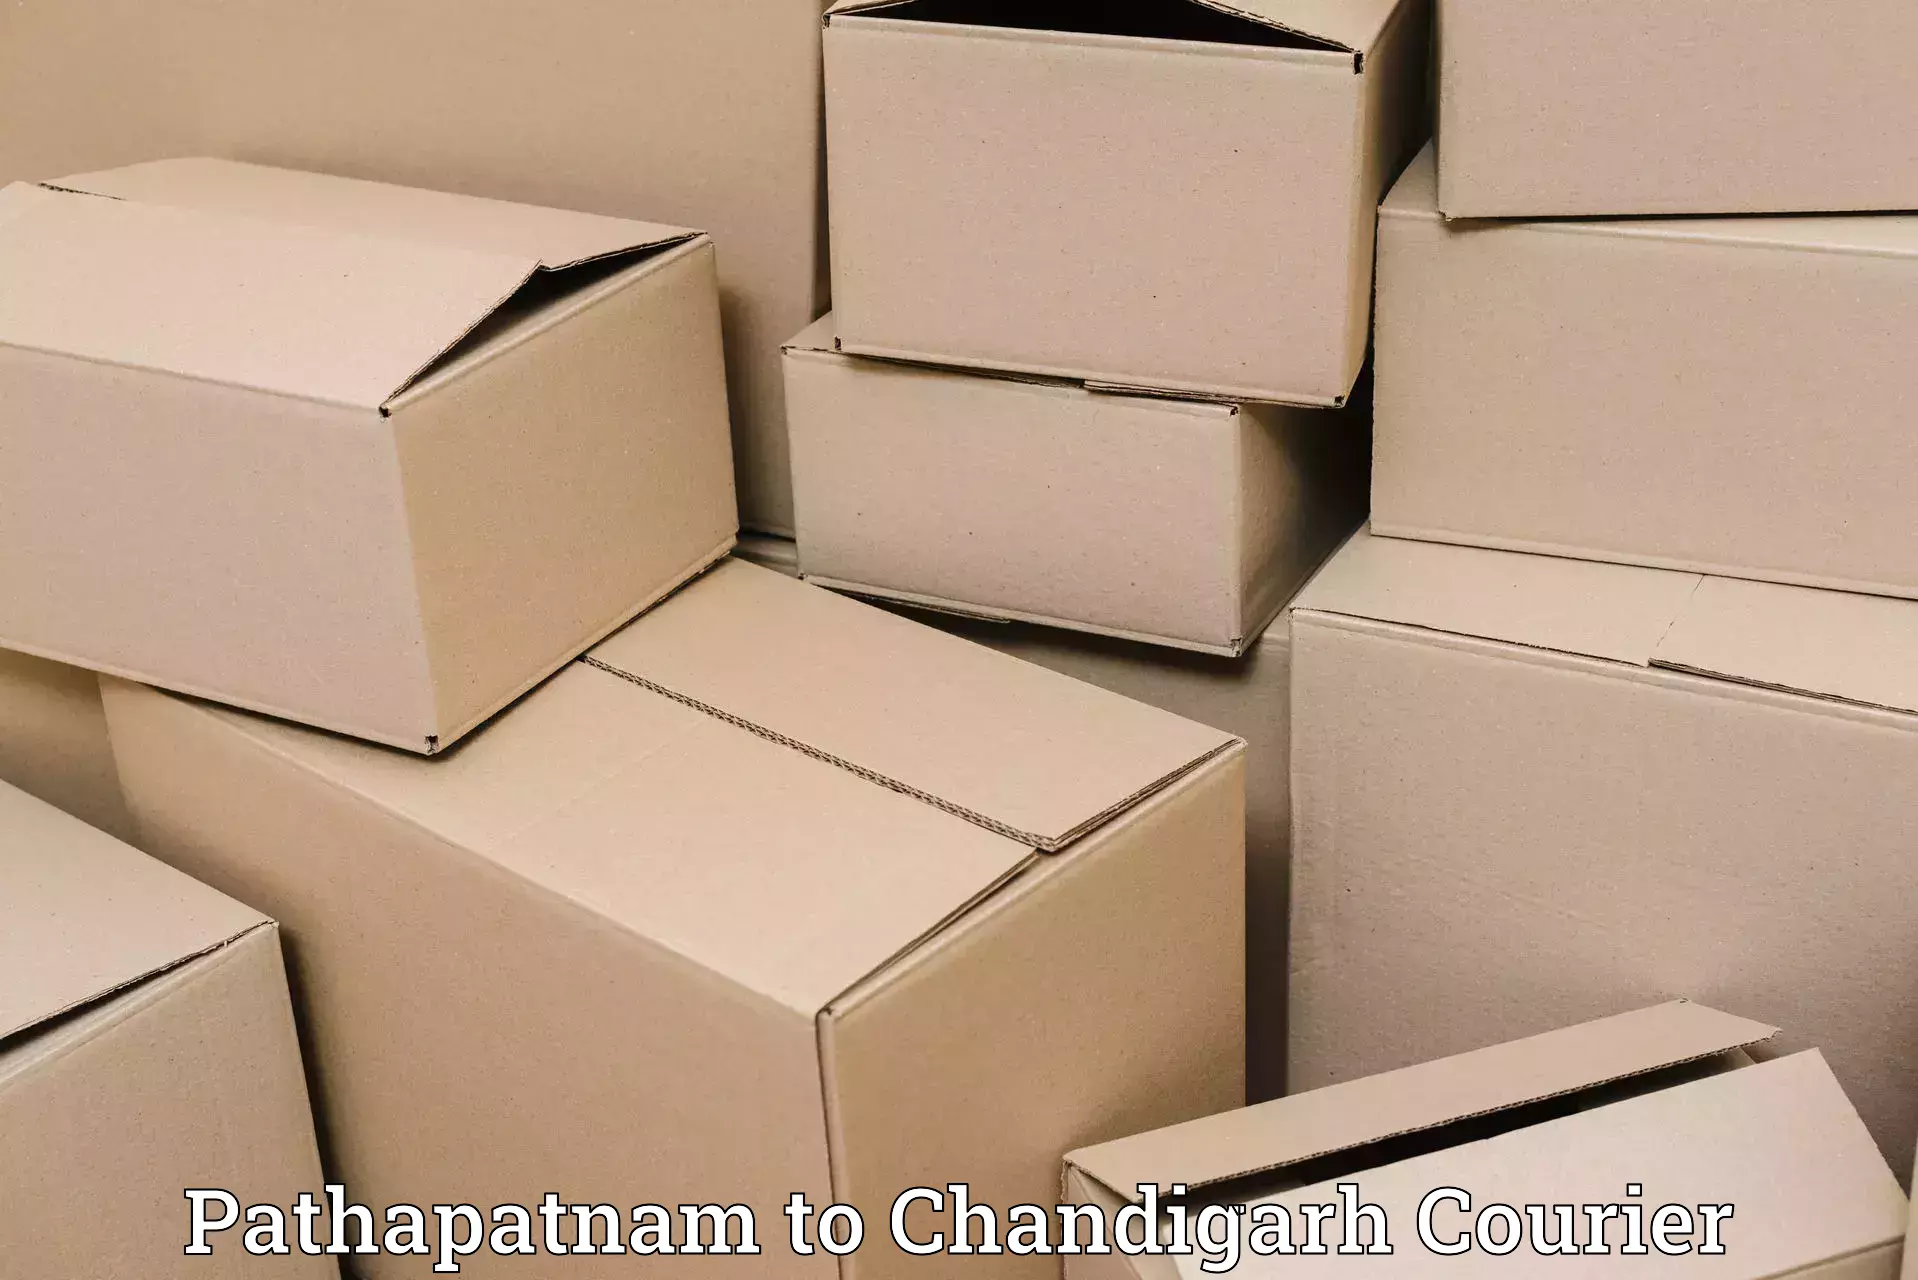 Efficient parcel tracking Pathapatnam to Chandigarh